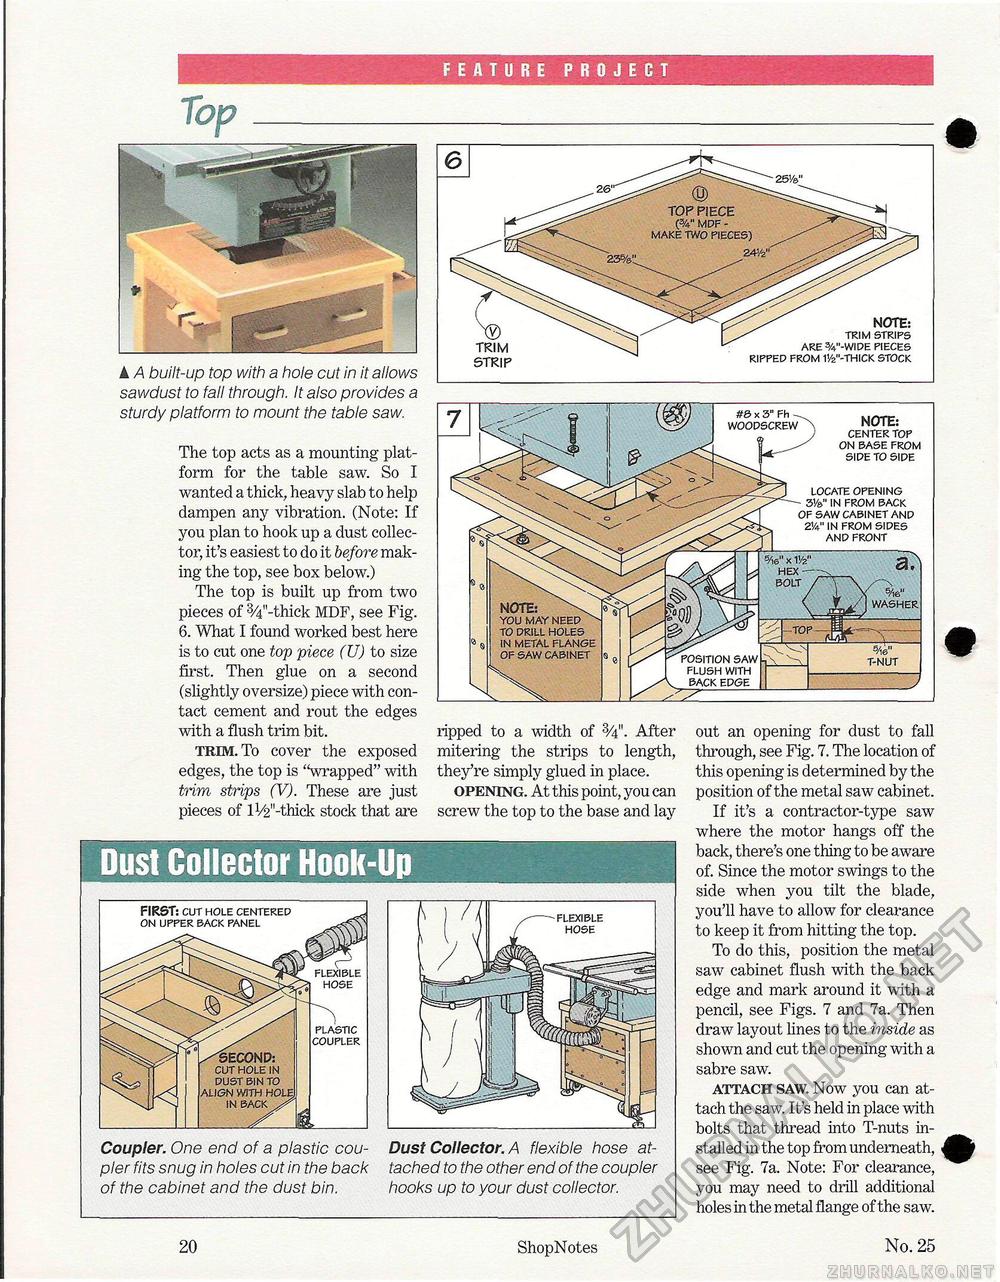 25 - Special Table Saw Issue,  20